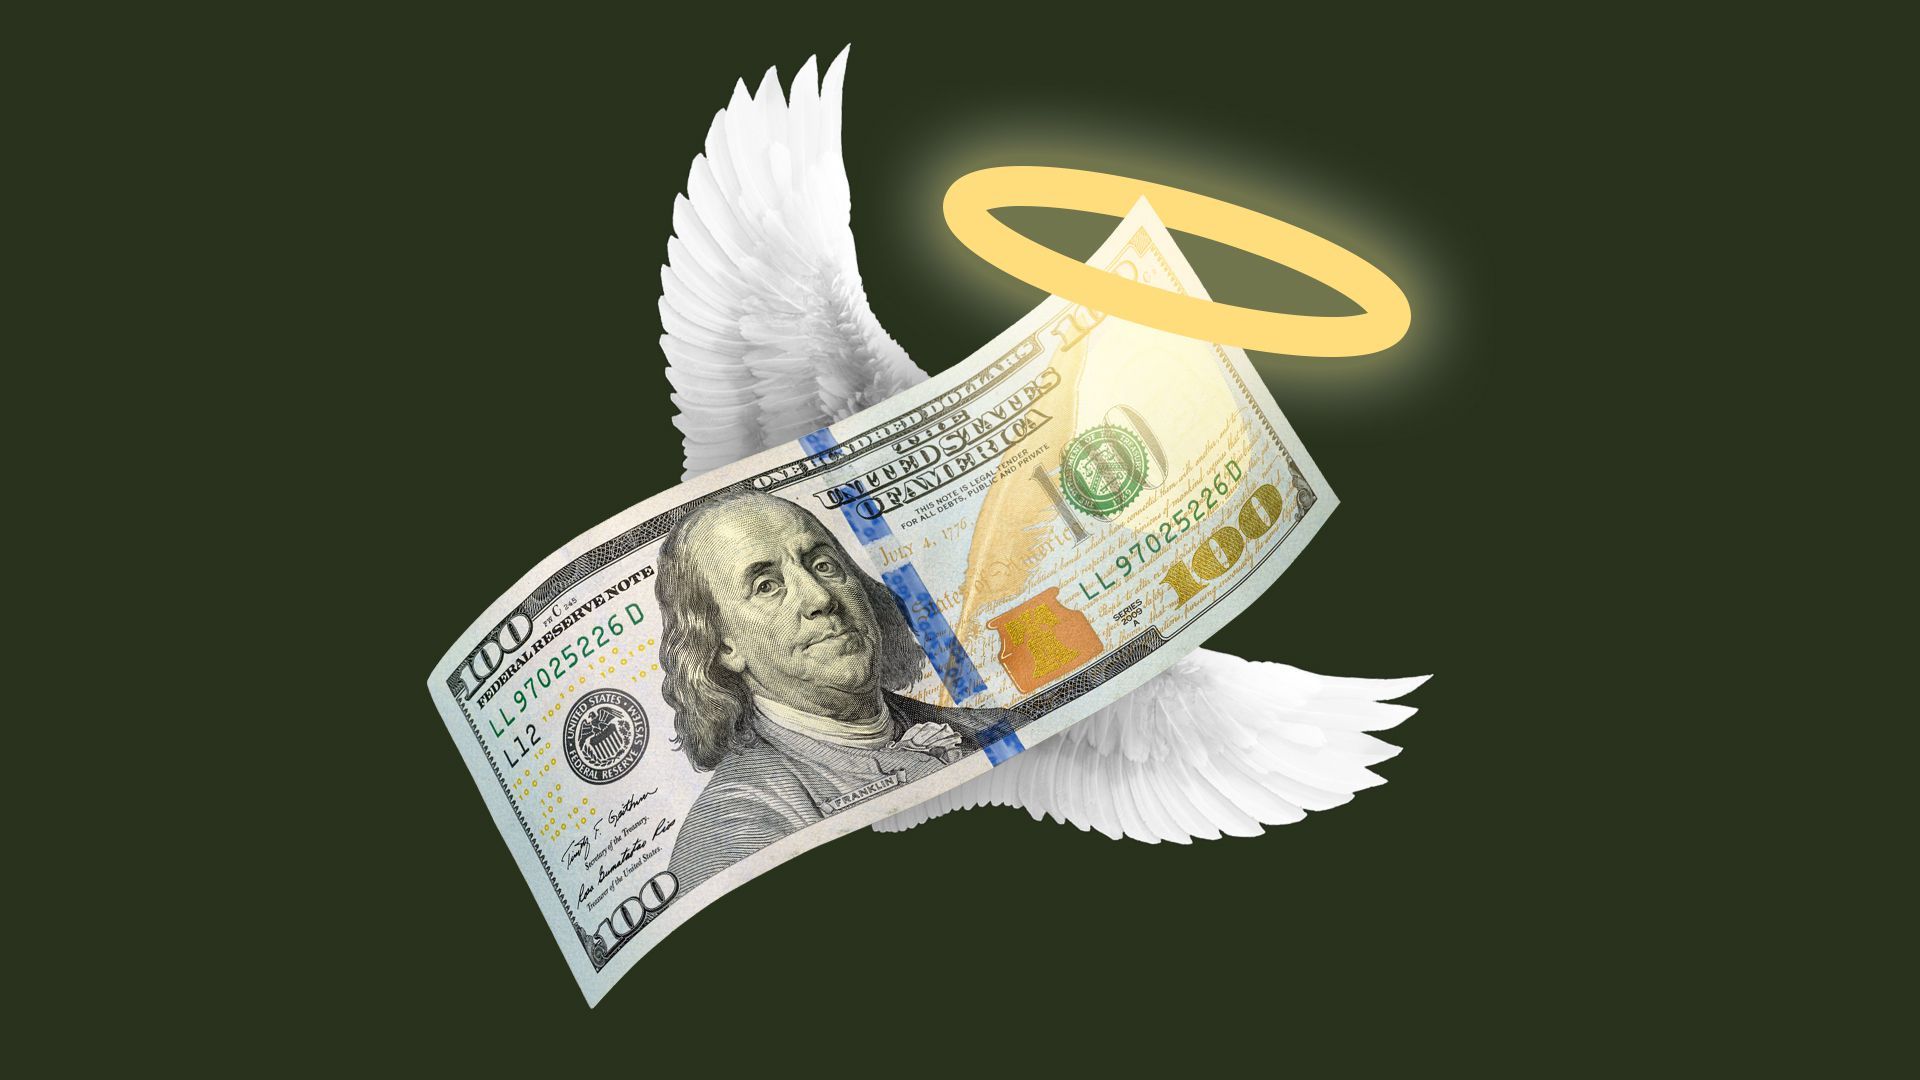 Illustration of a one hundred dollar bill with wings and a glowing halo